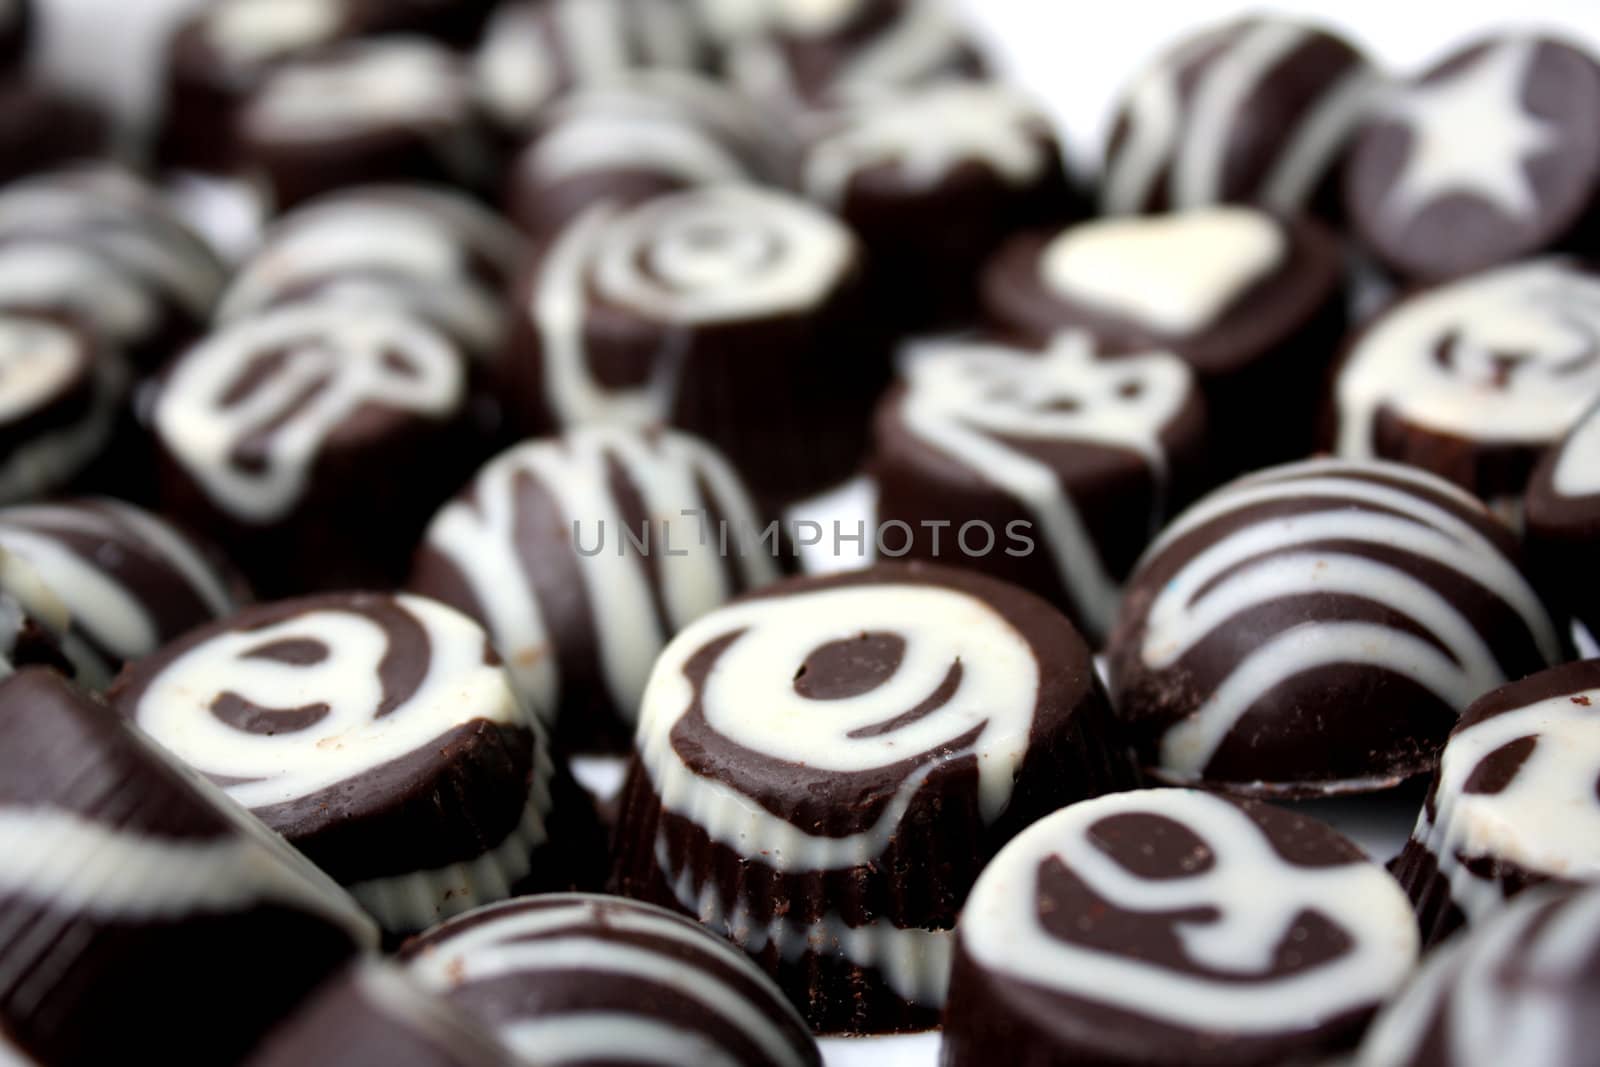 A background of delicious looking chocolates with a white design.